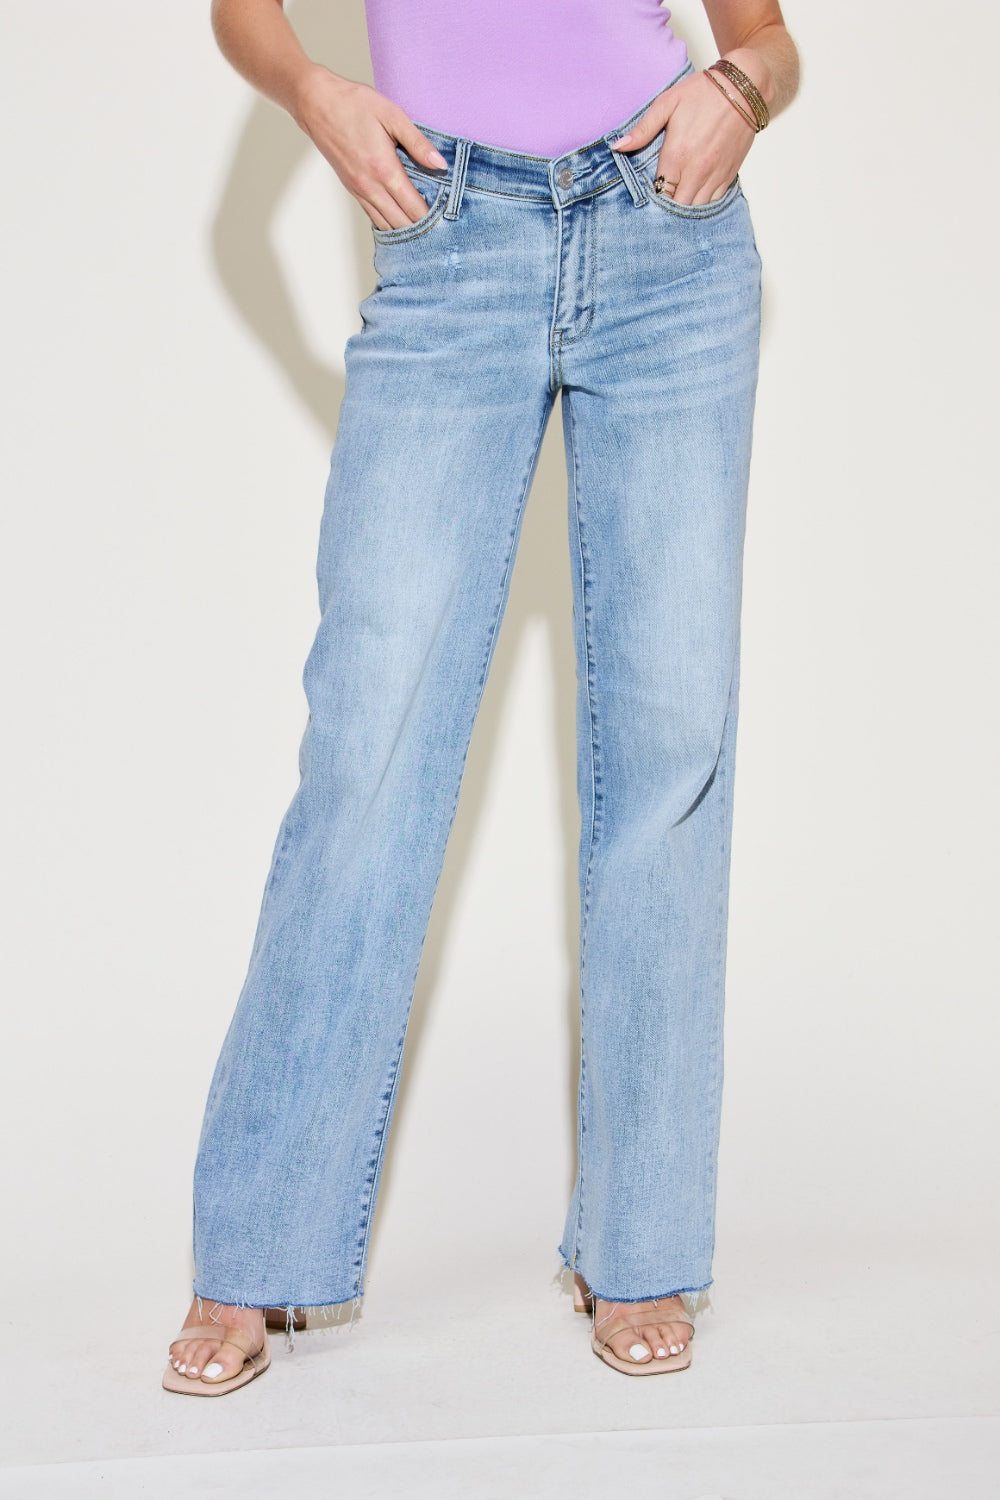 Size Inclusive V Front Waistband Straight Jeans